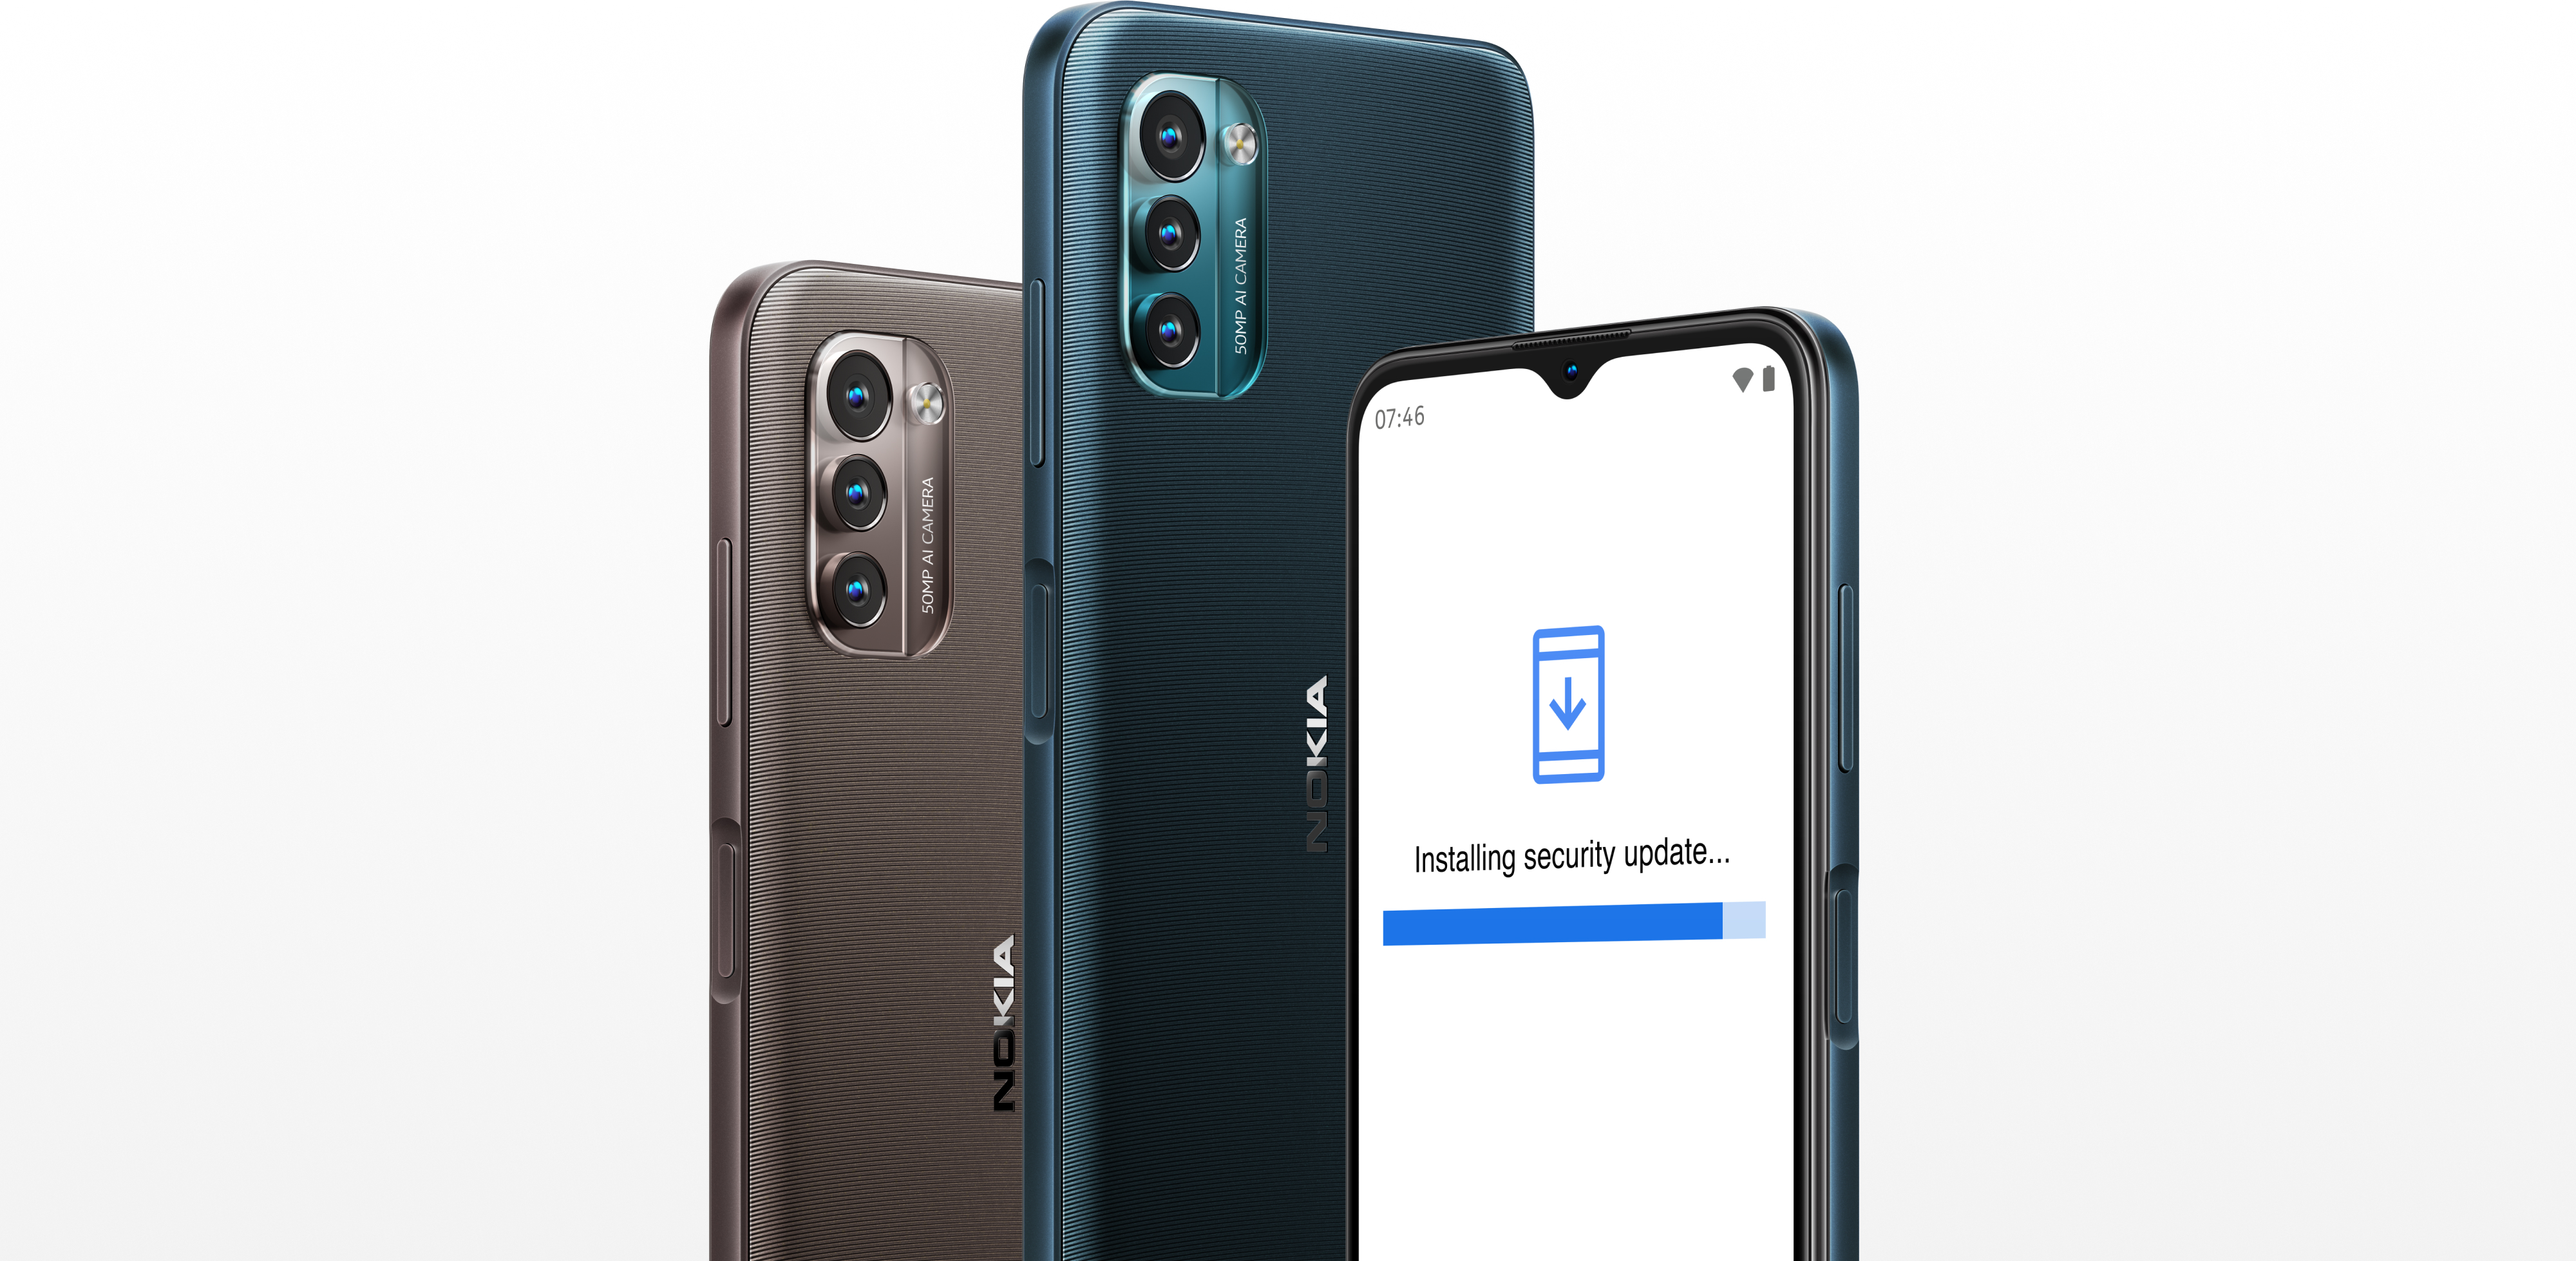 Nokia Aurora 5G: HMD Global's rumoured smartphone with 144MP camera,  7900mAh battery, remarkable features